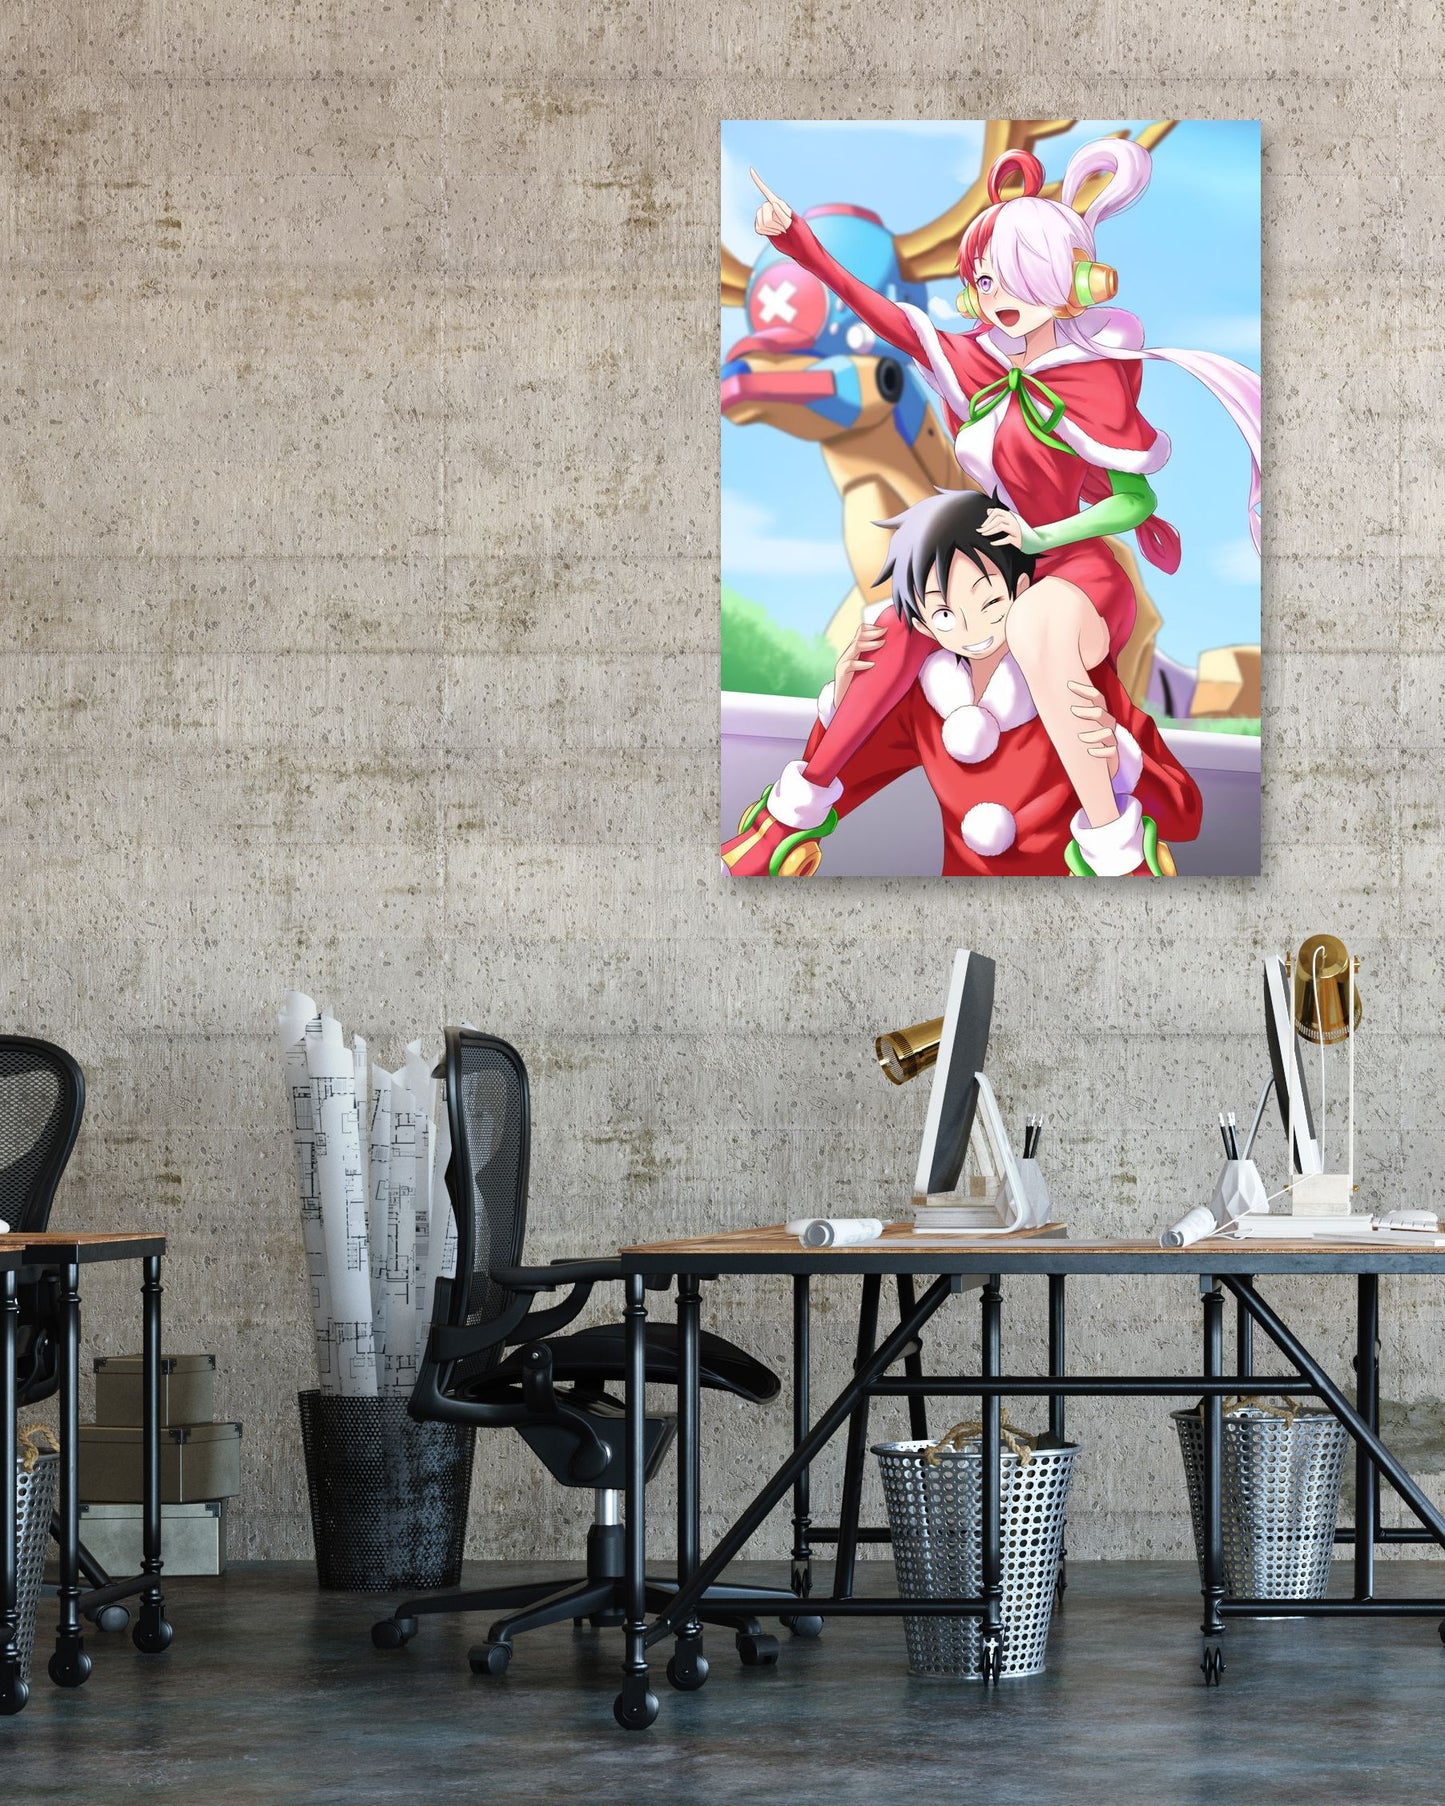 One piece 10 - @UPGallery